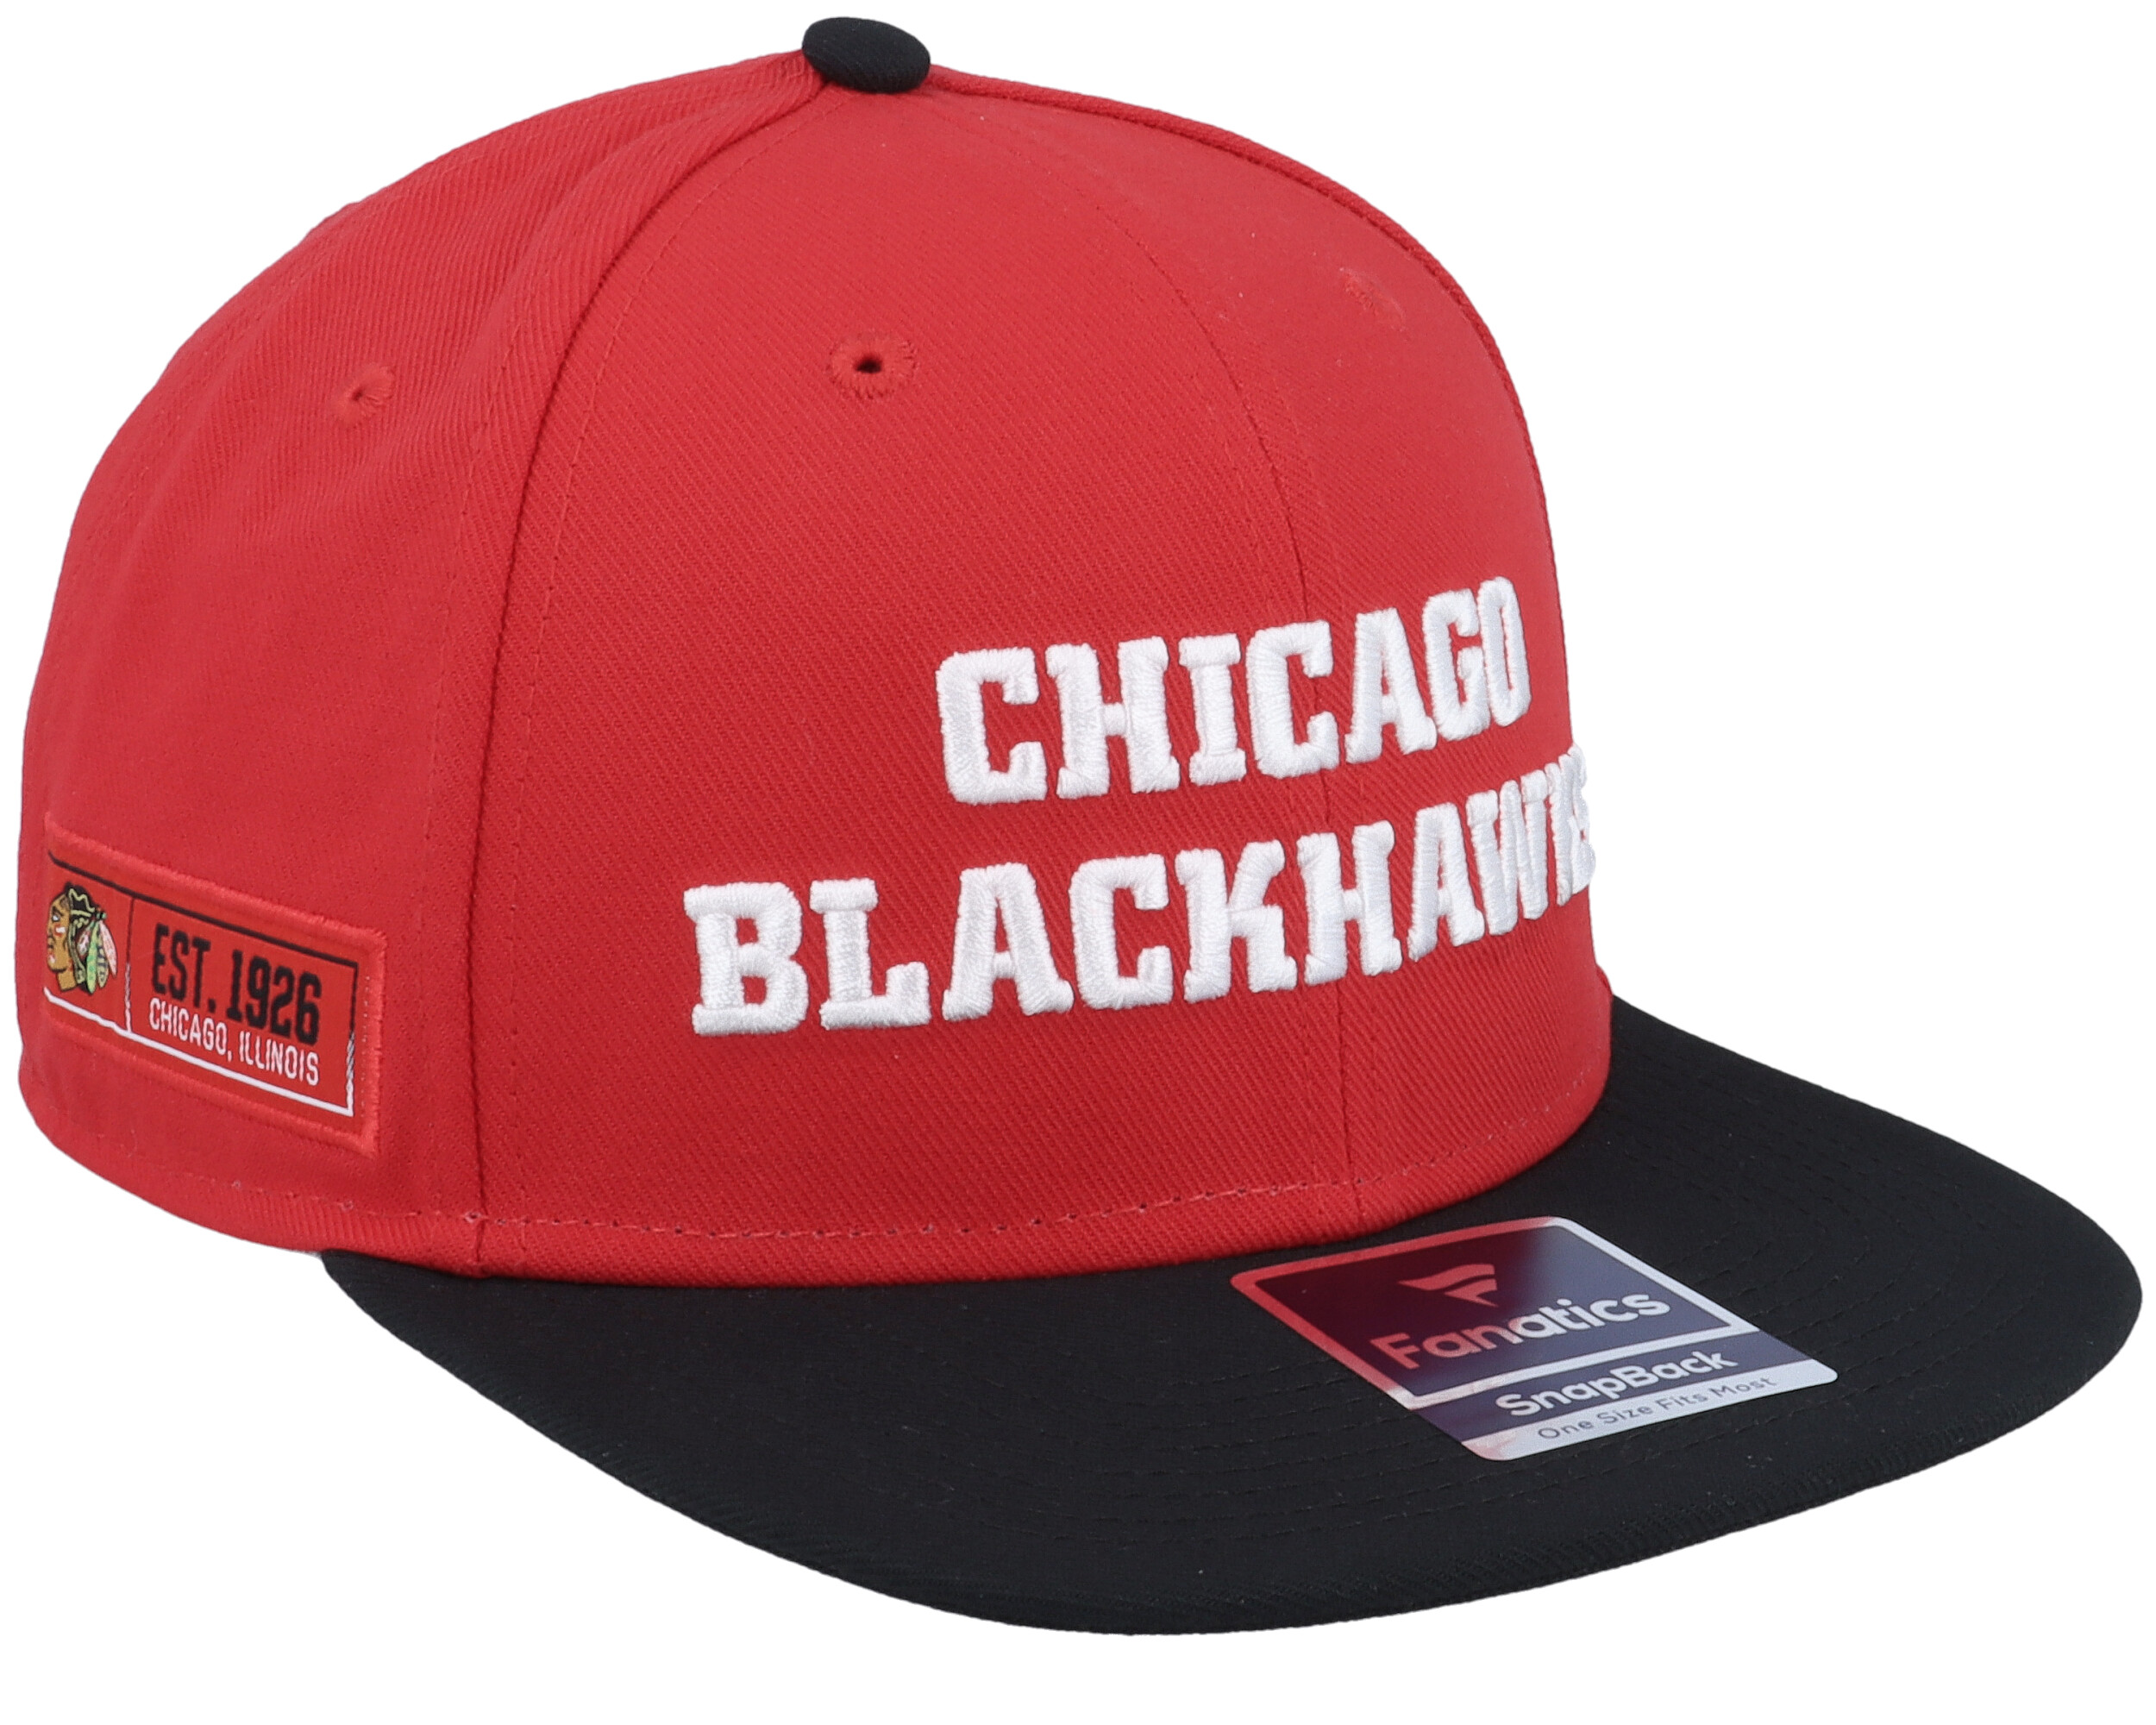 New Era 59Fifty Chicago Blackhawks Fitted Hat Black Scarlet Red